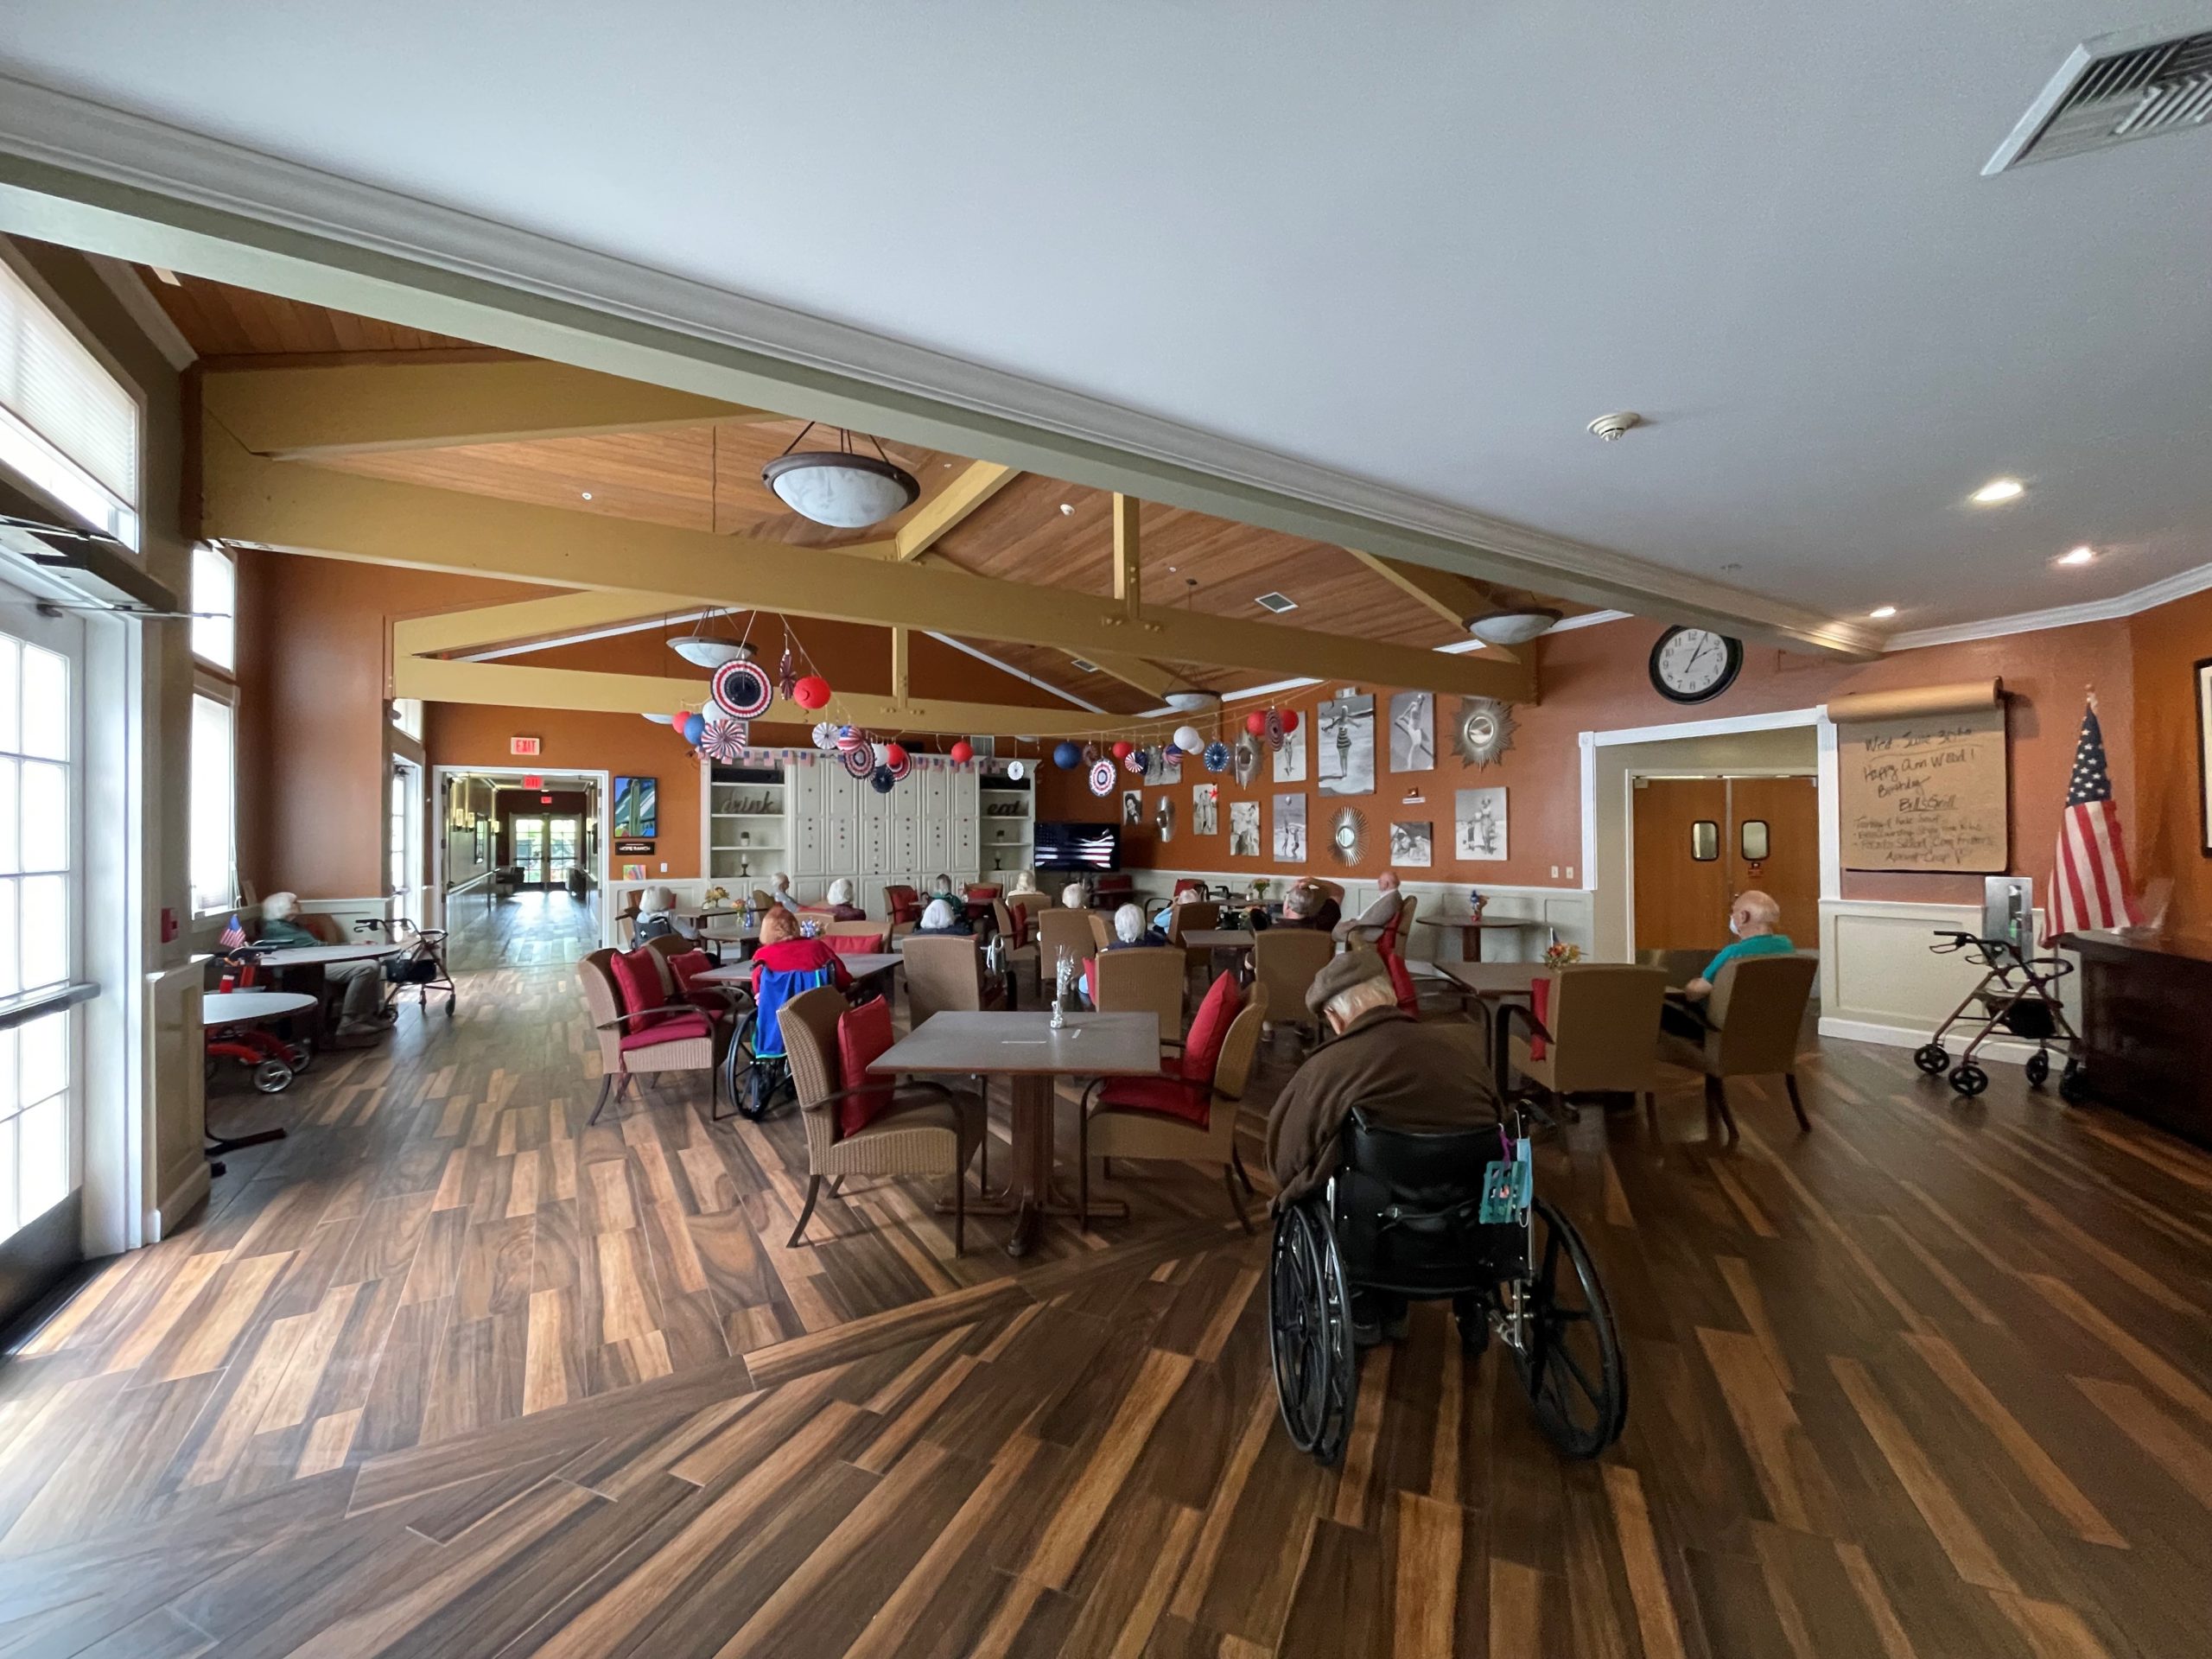 HERITAGE HOUSE-AN ASSISTED LIVING COMMUNITY